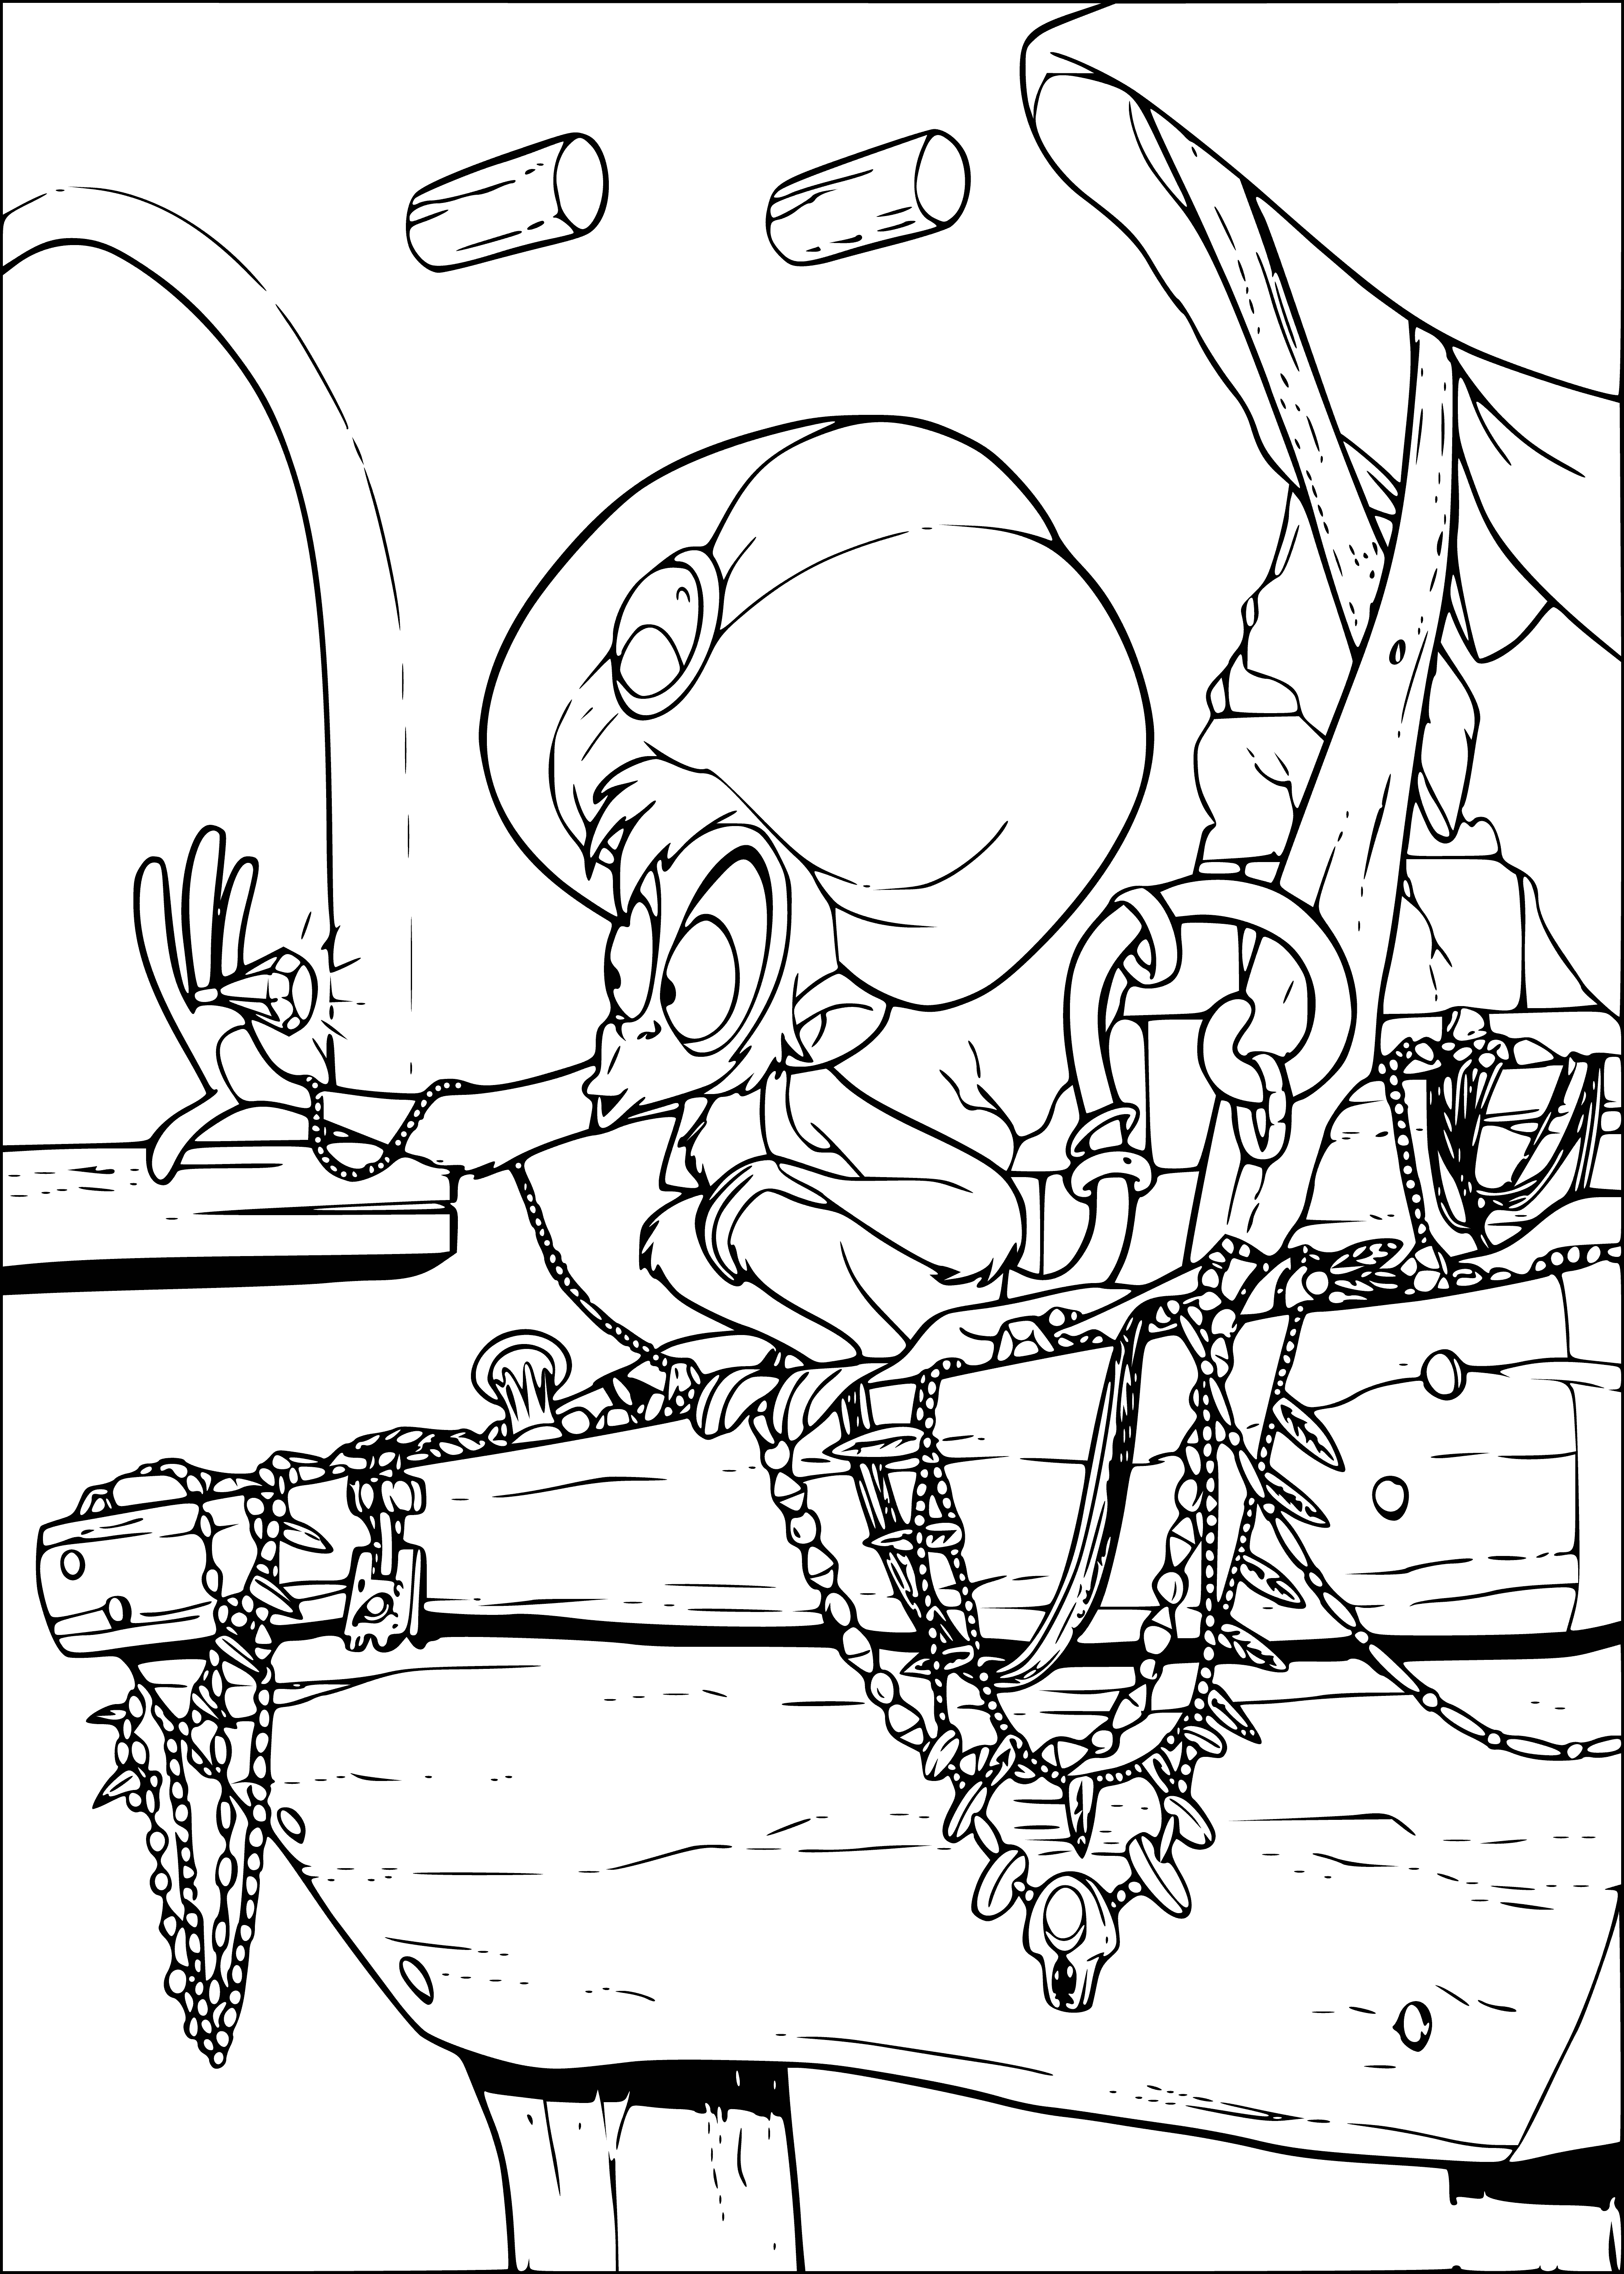 coloring page: Abu steals a loaf of bread in Aladdin - a small, monkey-like creature with brown fur and a mischievous expression.